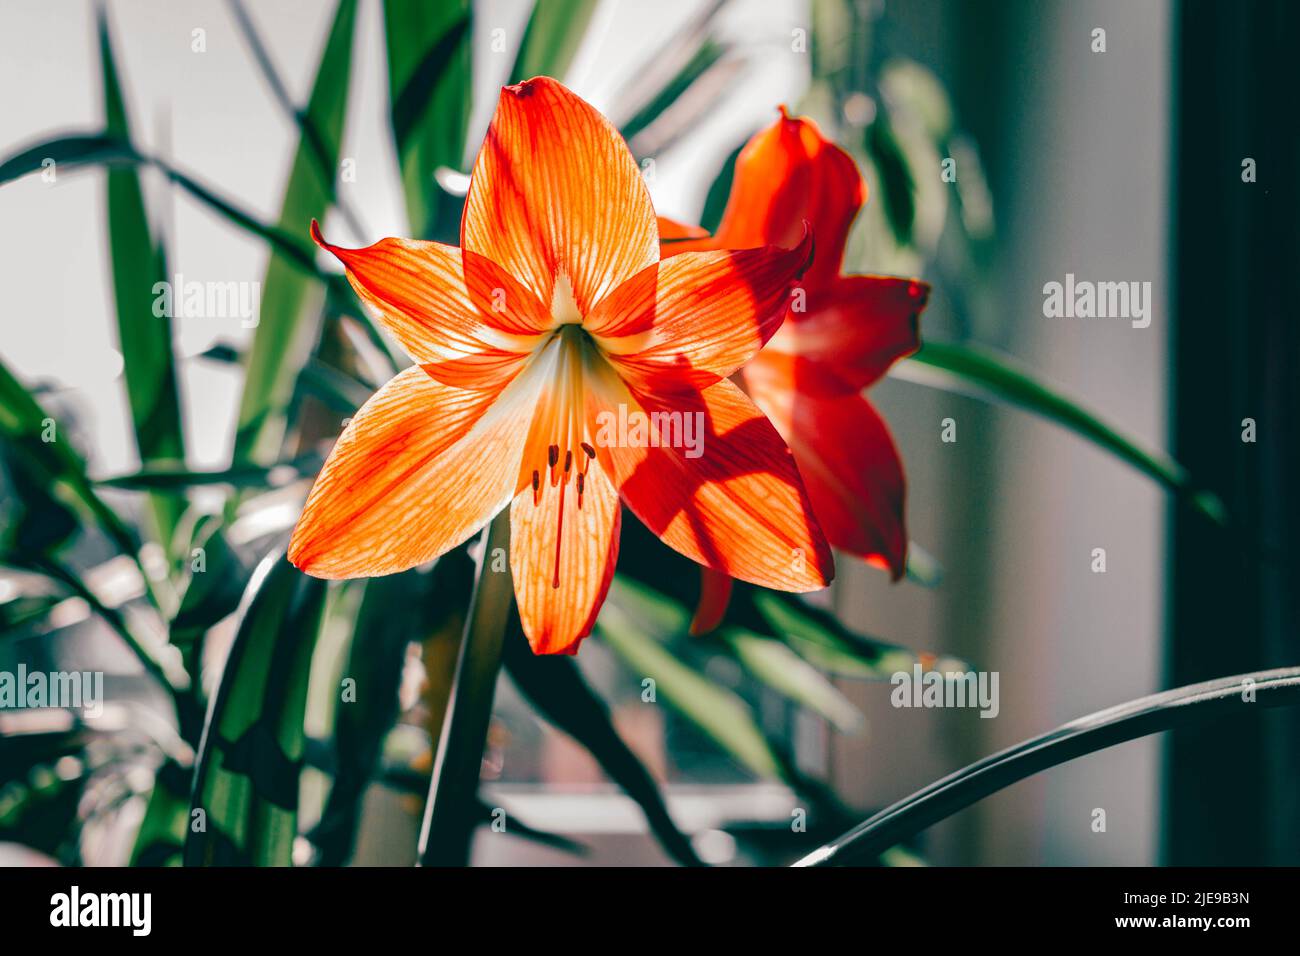 vibrant orange double amaryllis flower with beautiful sun lit petals and green leafy background Stock Photo